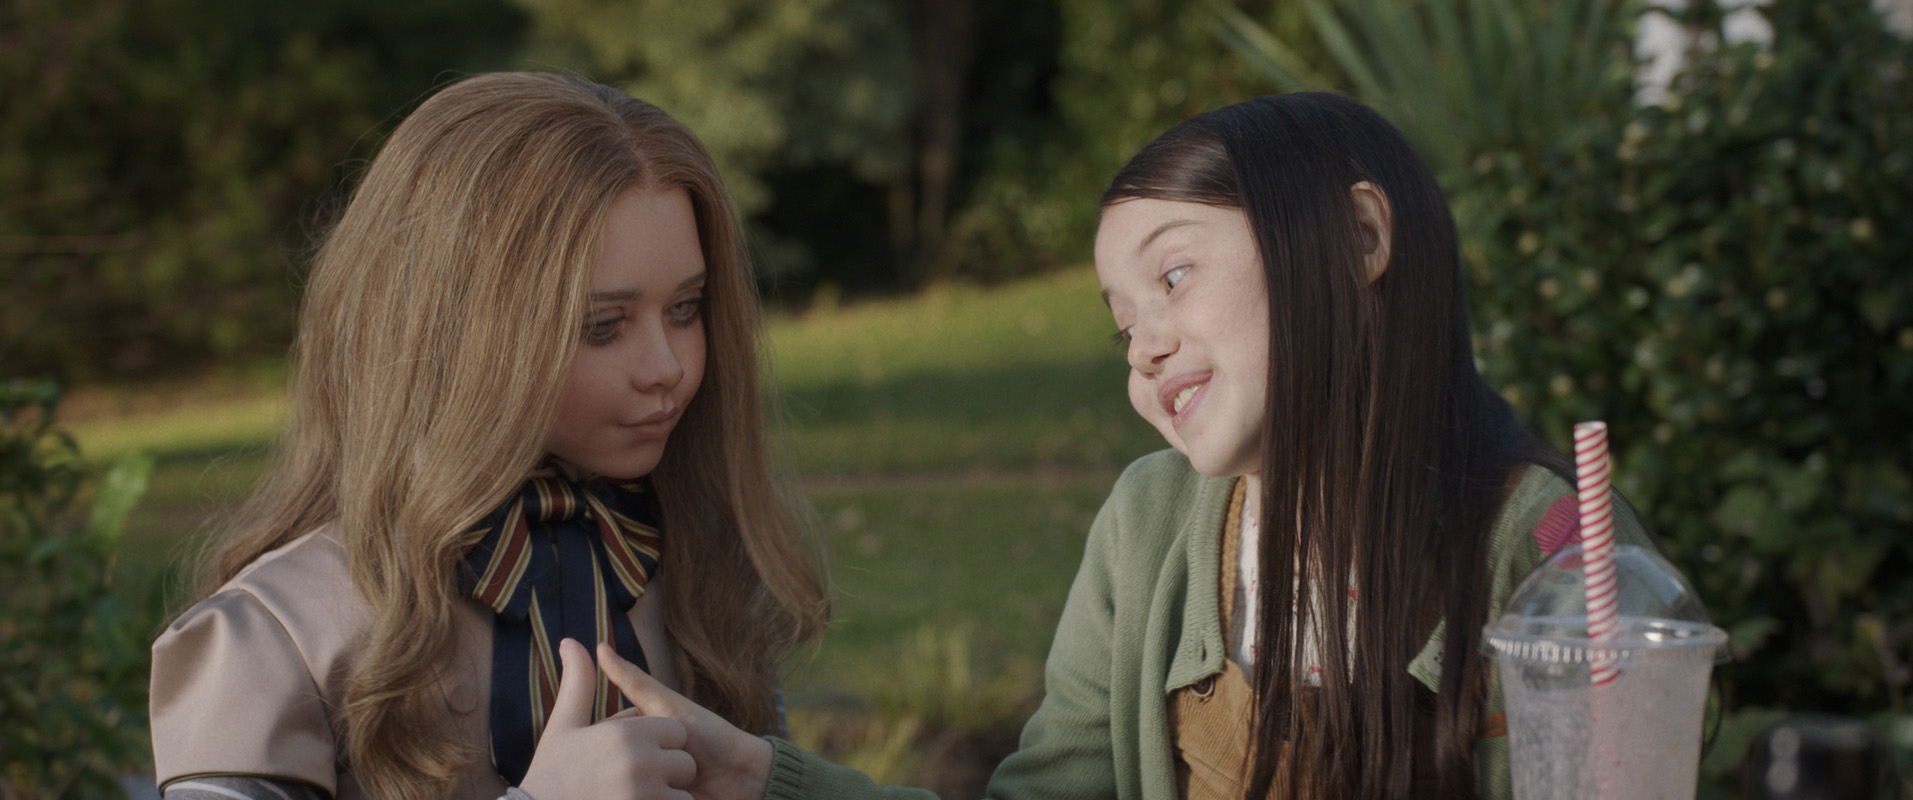 Amie Donald as M3gan and Violet McGraw as Cady in director Gerard Johnstone’s “M3GAN.” Cr: Blumhouse